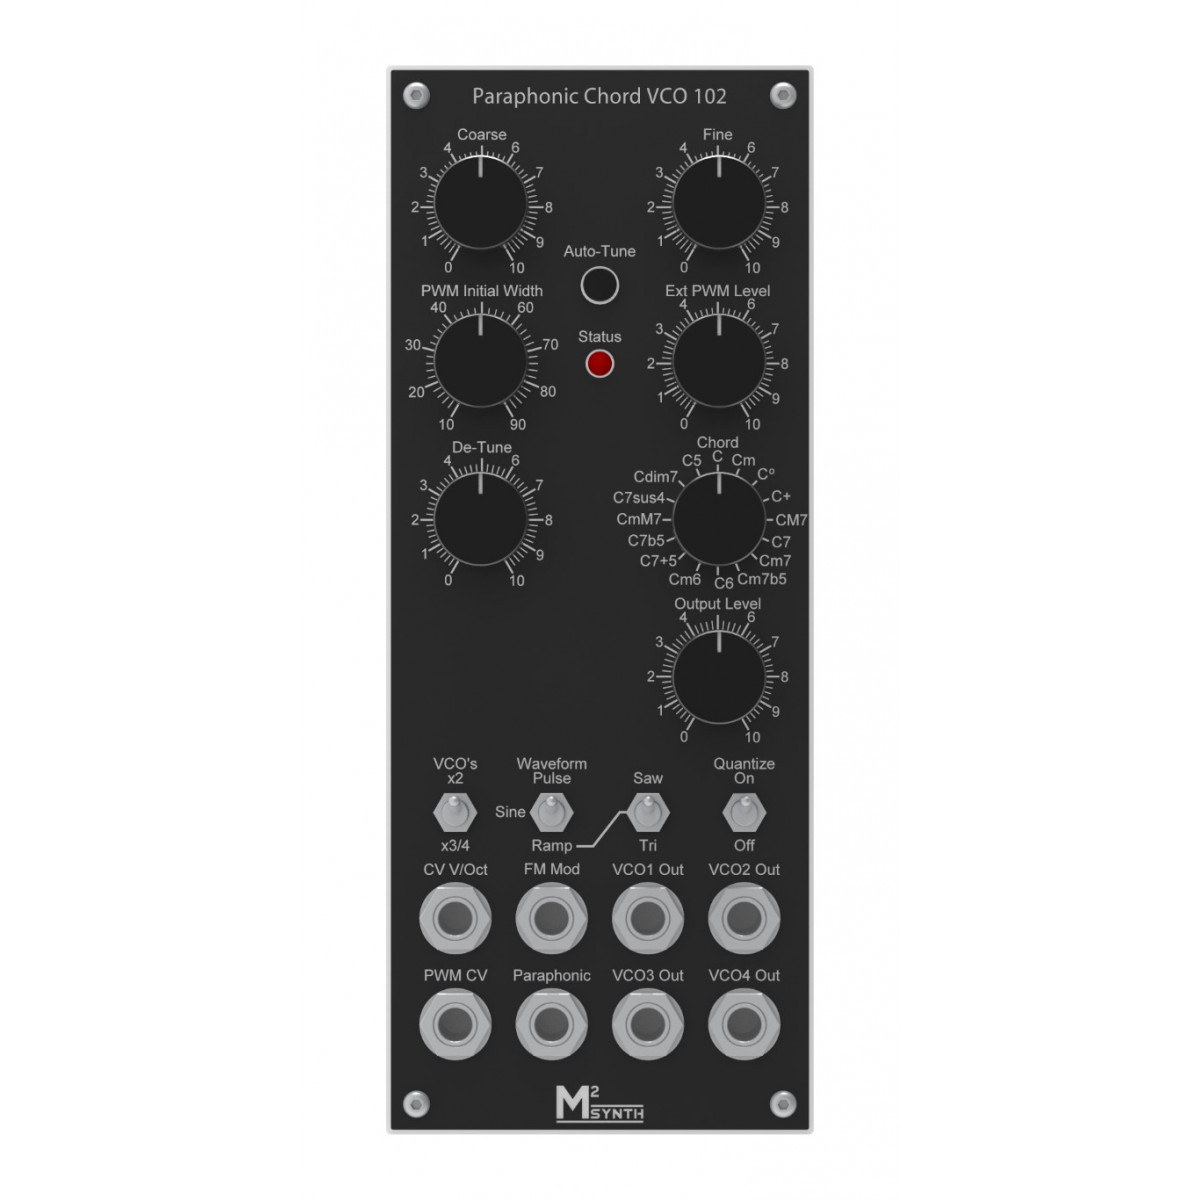 Paraphonic Chord VCO 102